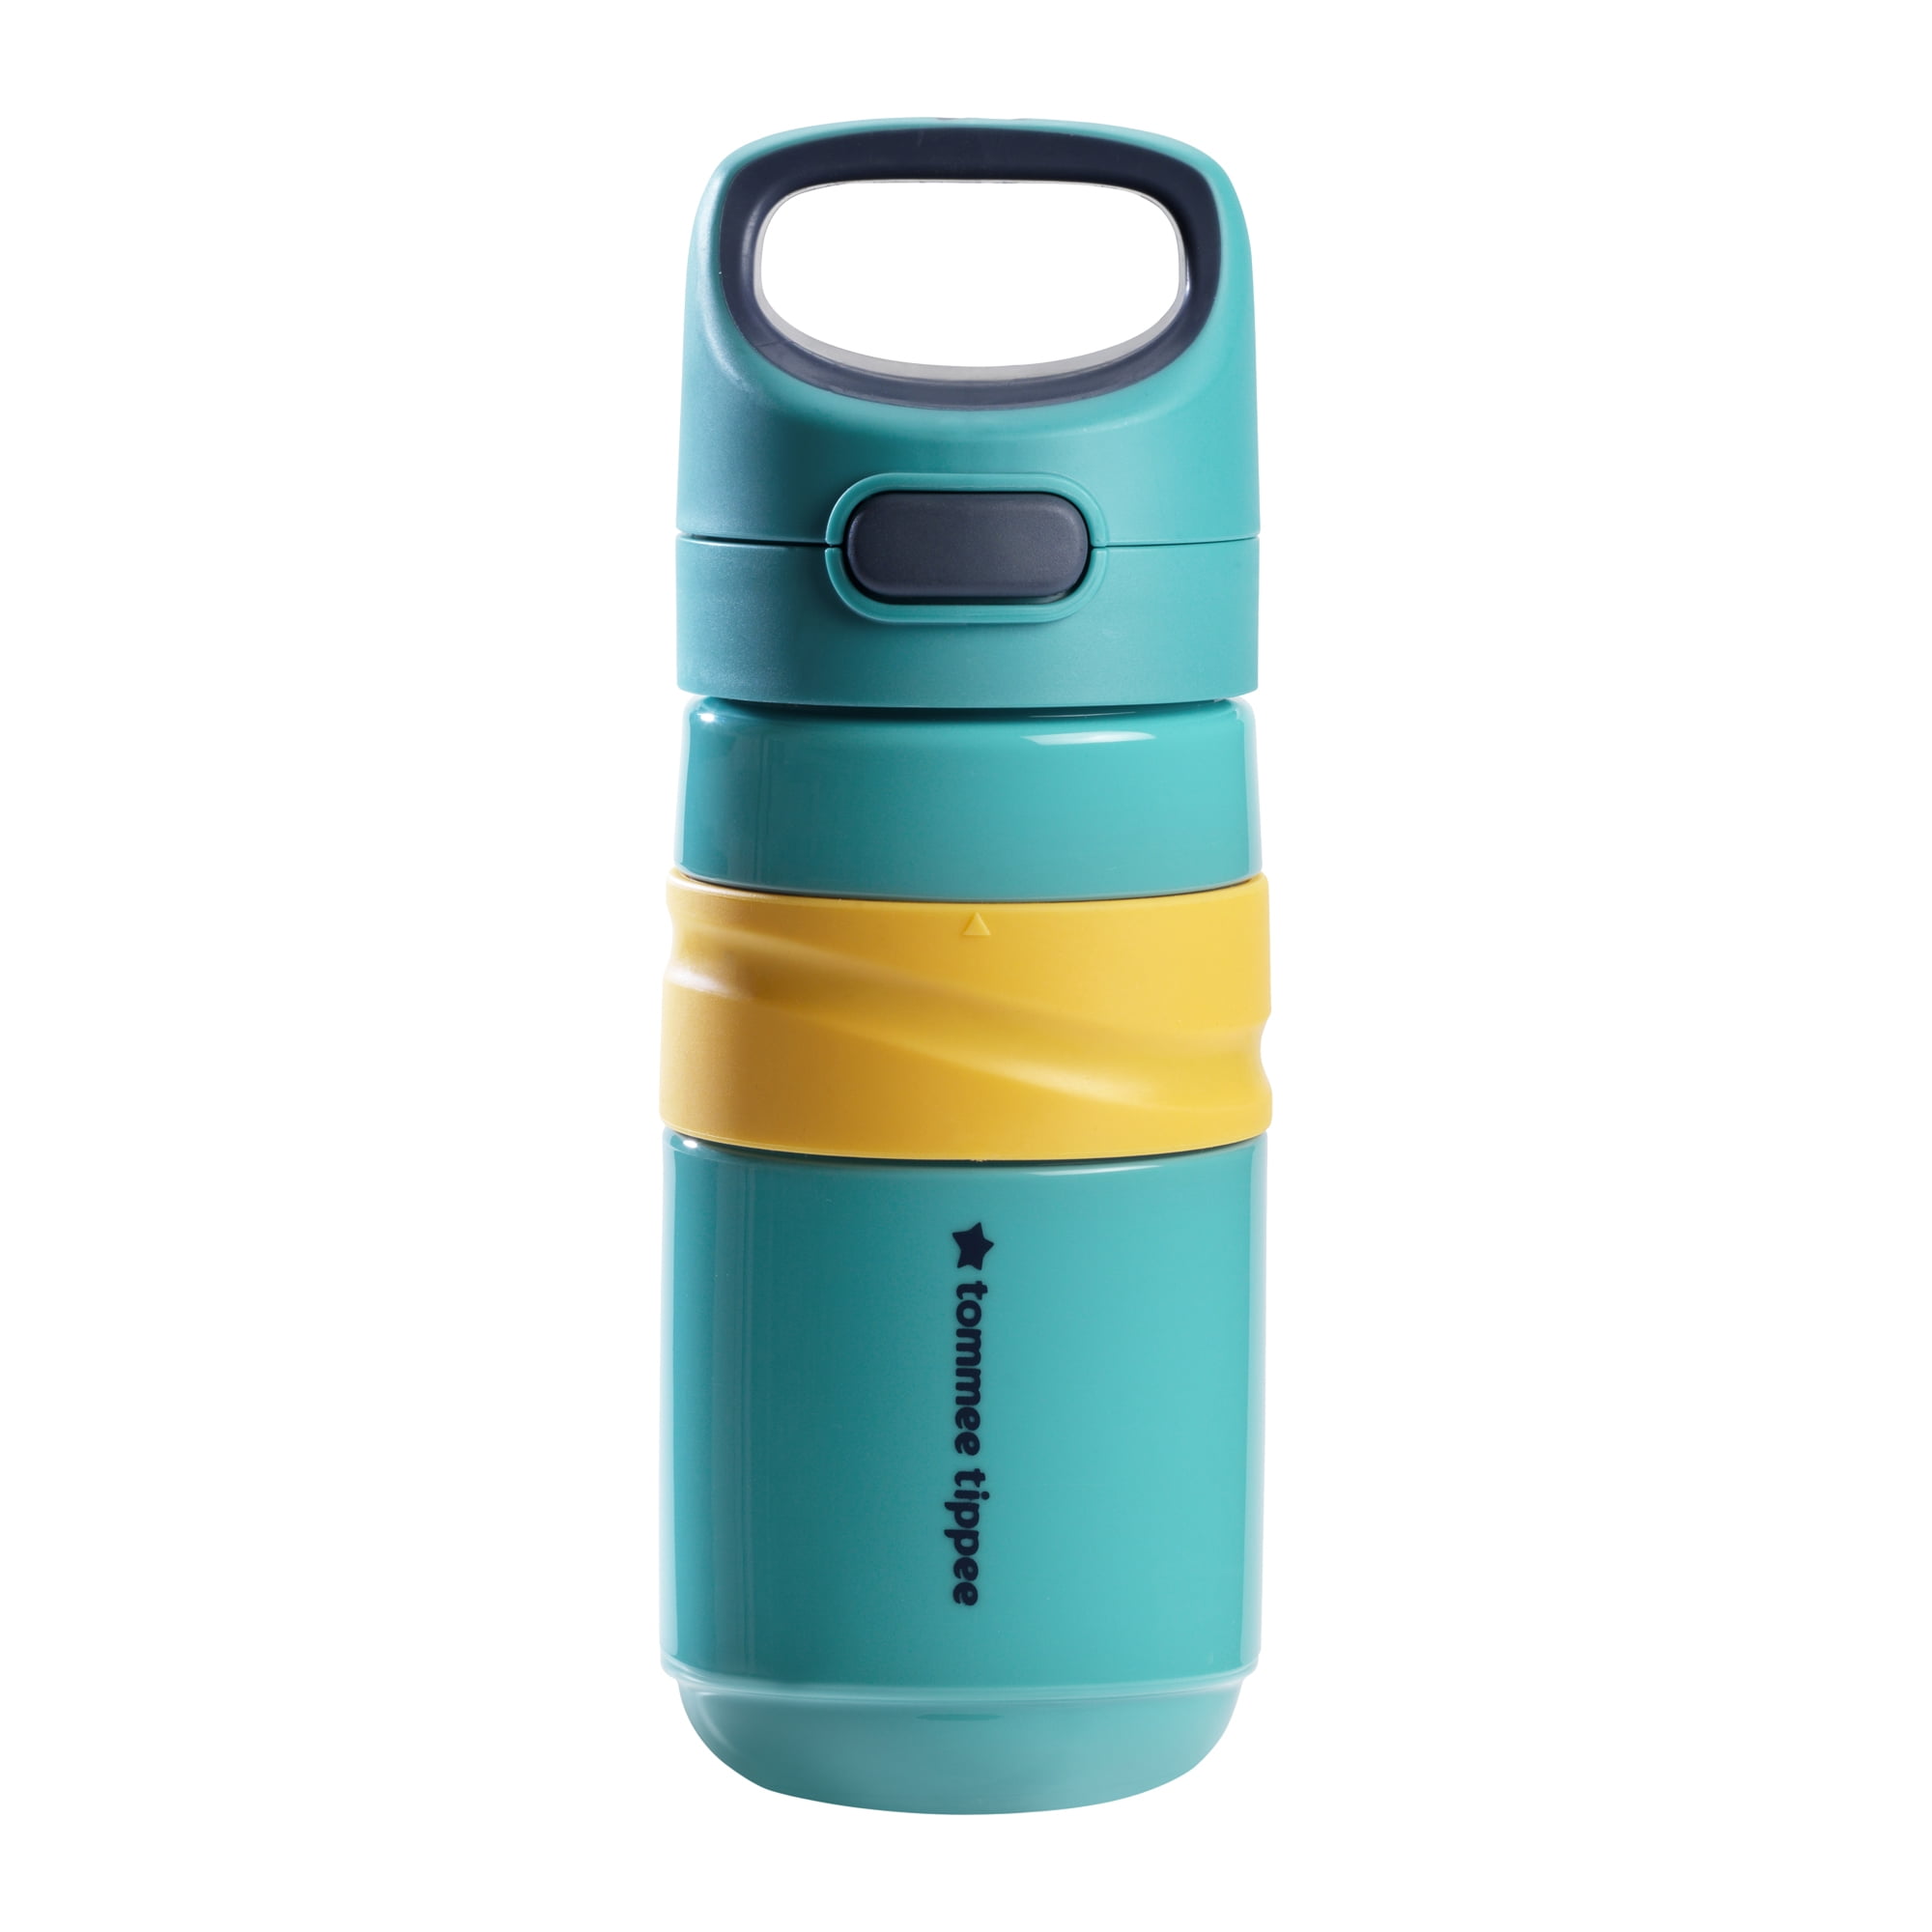 Re-Play 10oz Spill Proof Portable Cup - Desert